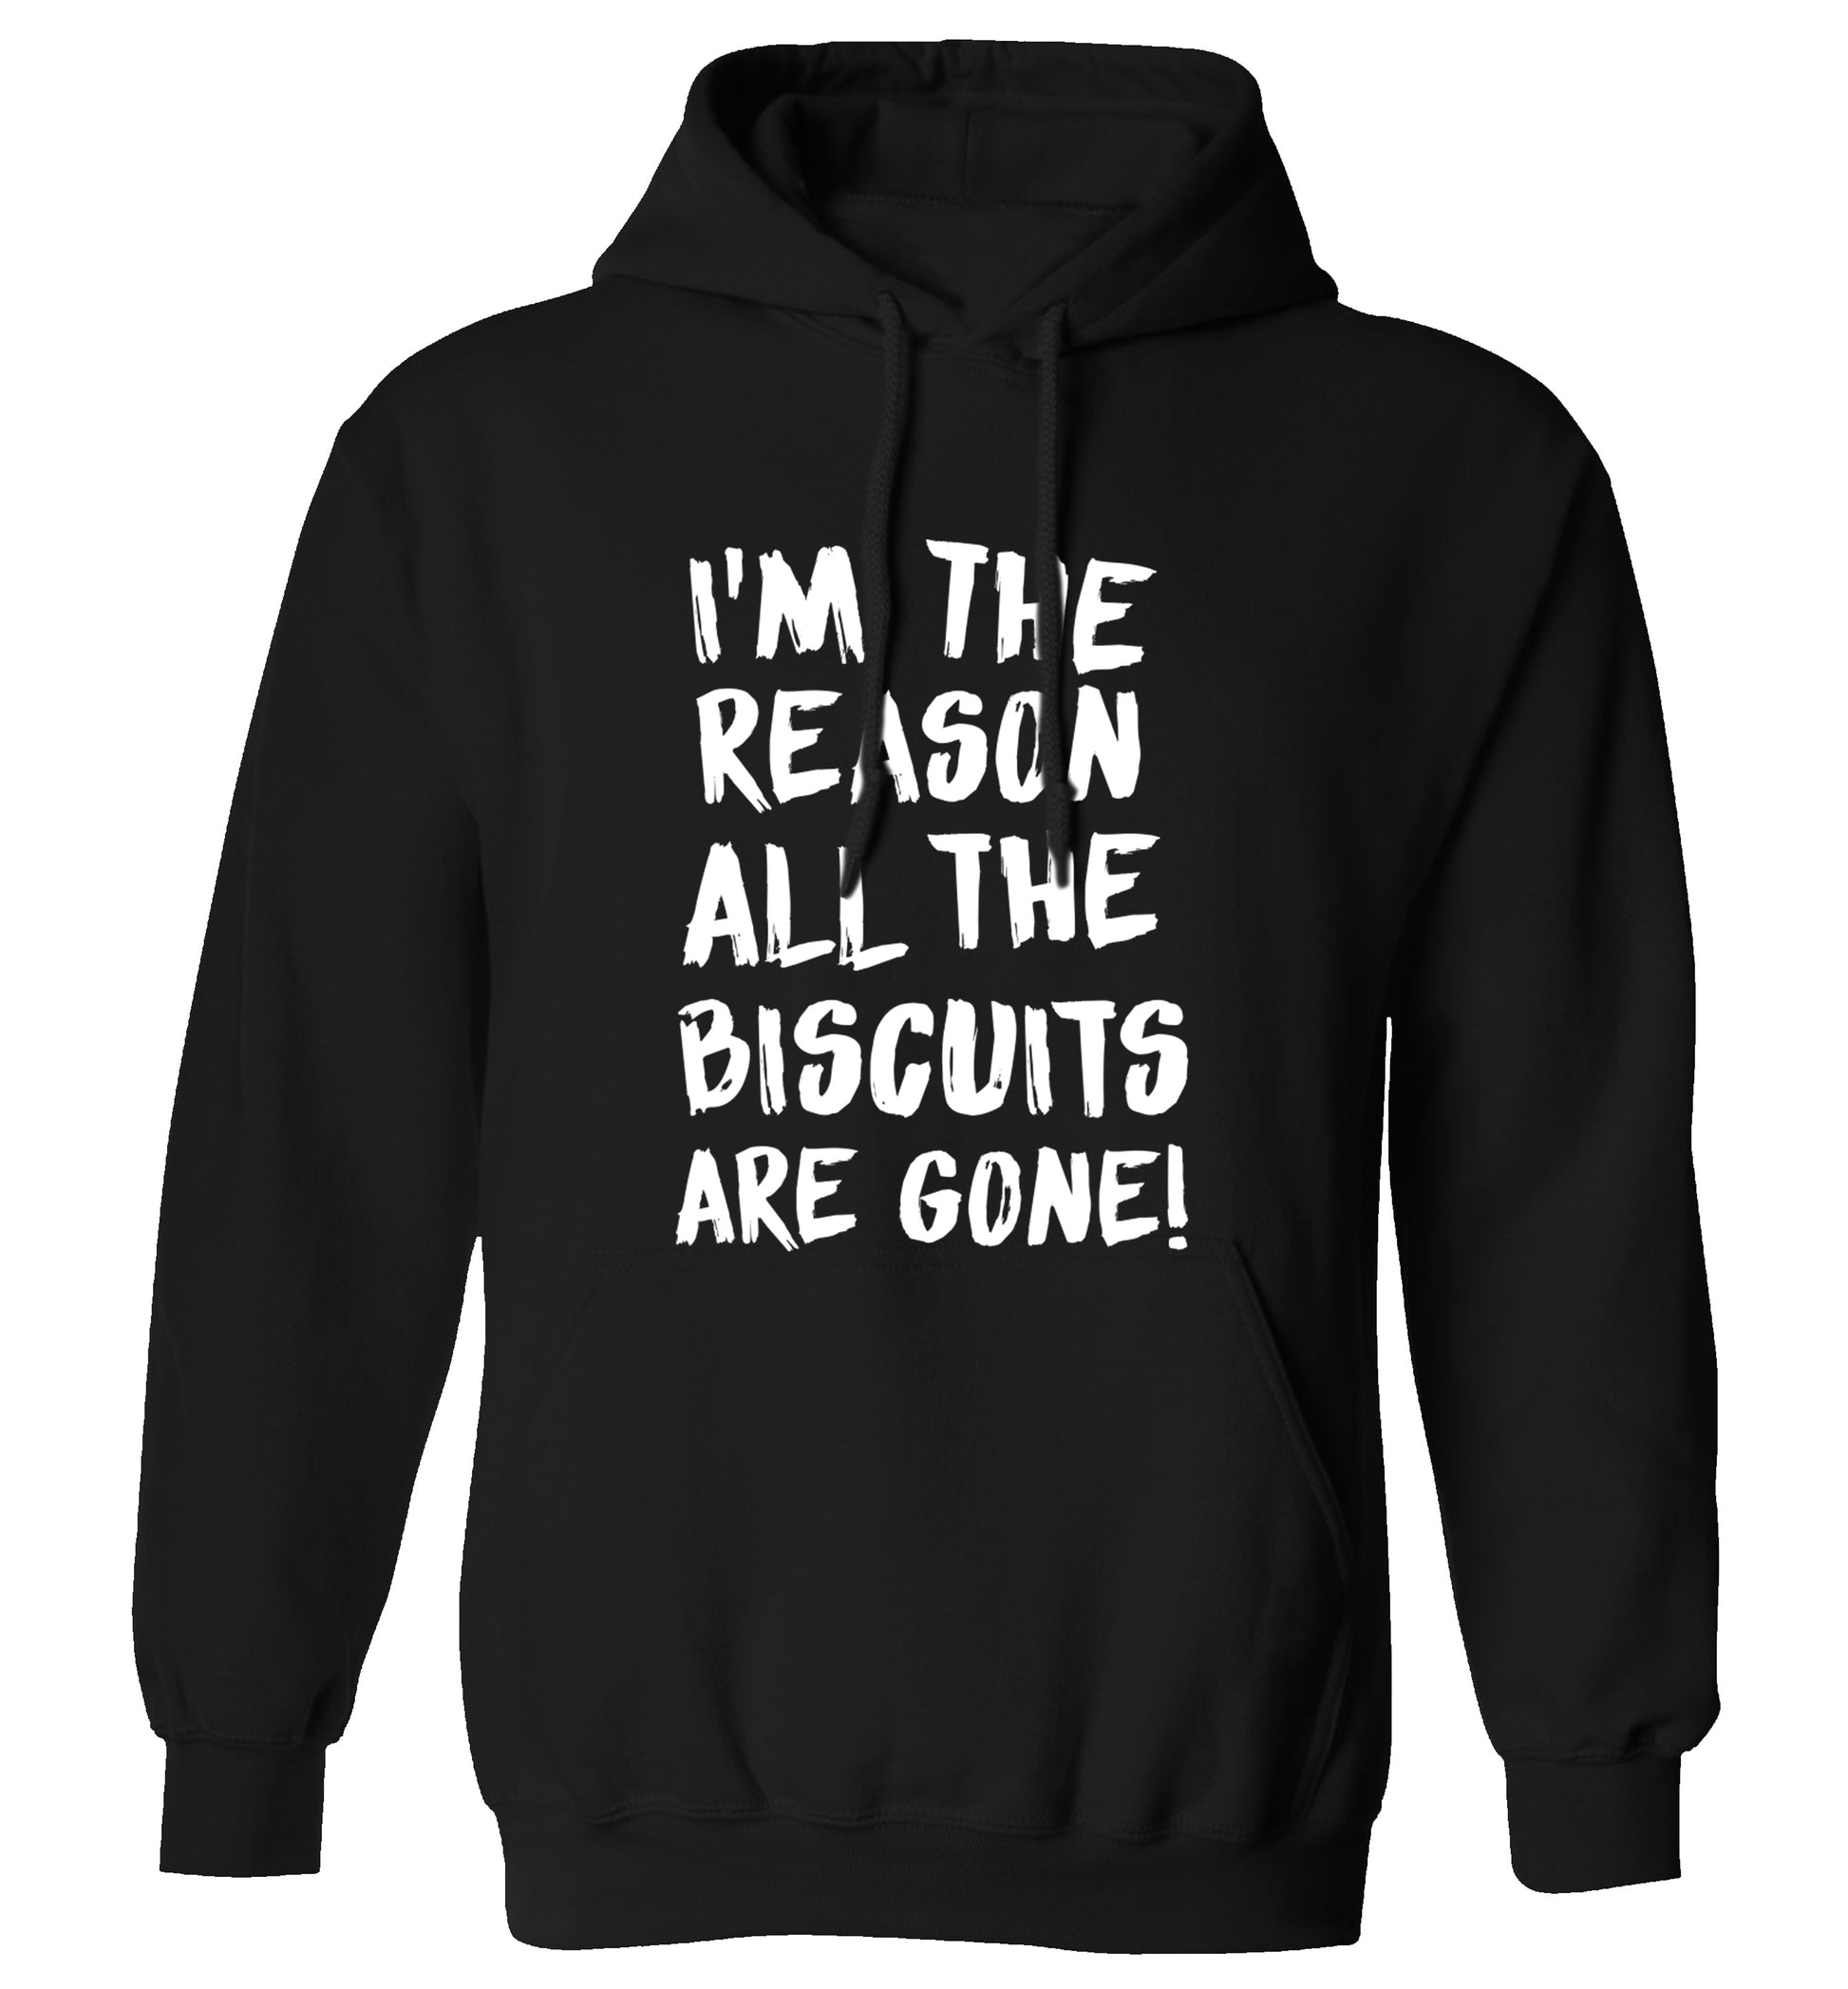 I'm the reason why all the biscuits are gone adults unisex black hoodie 2XL